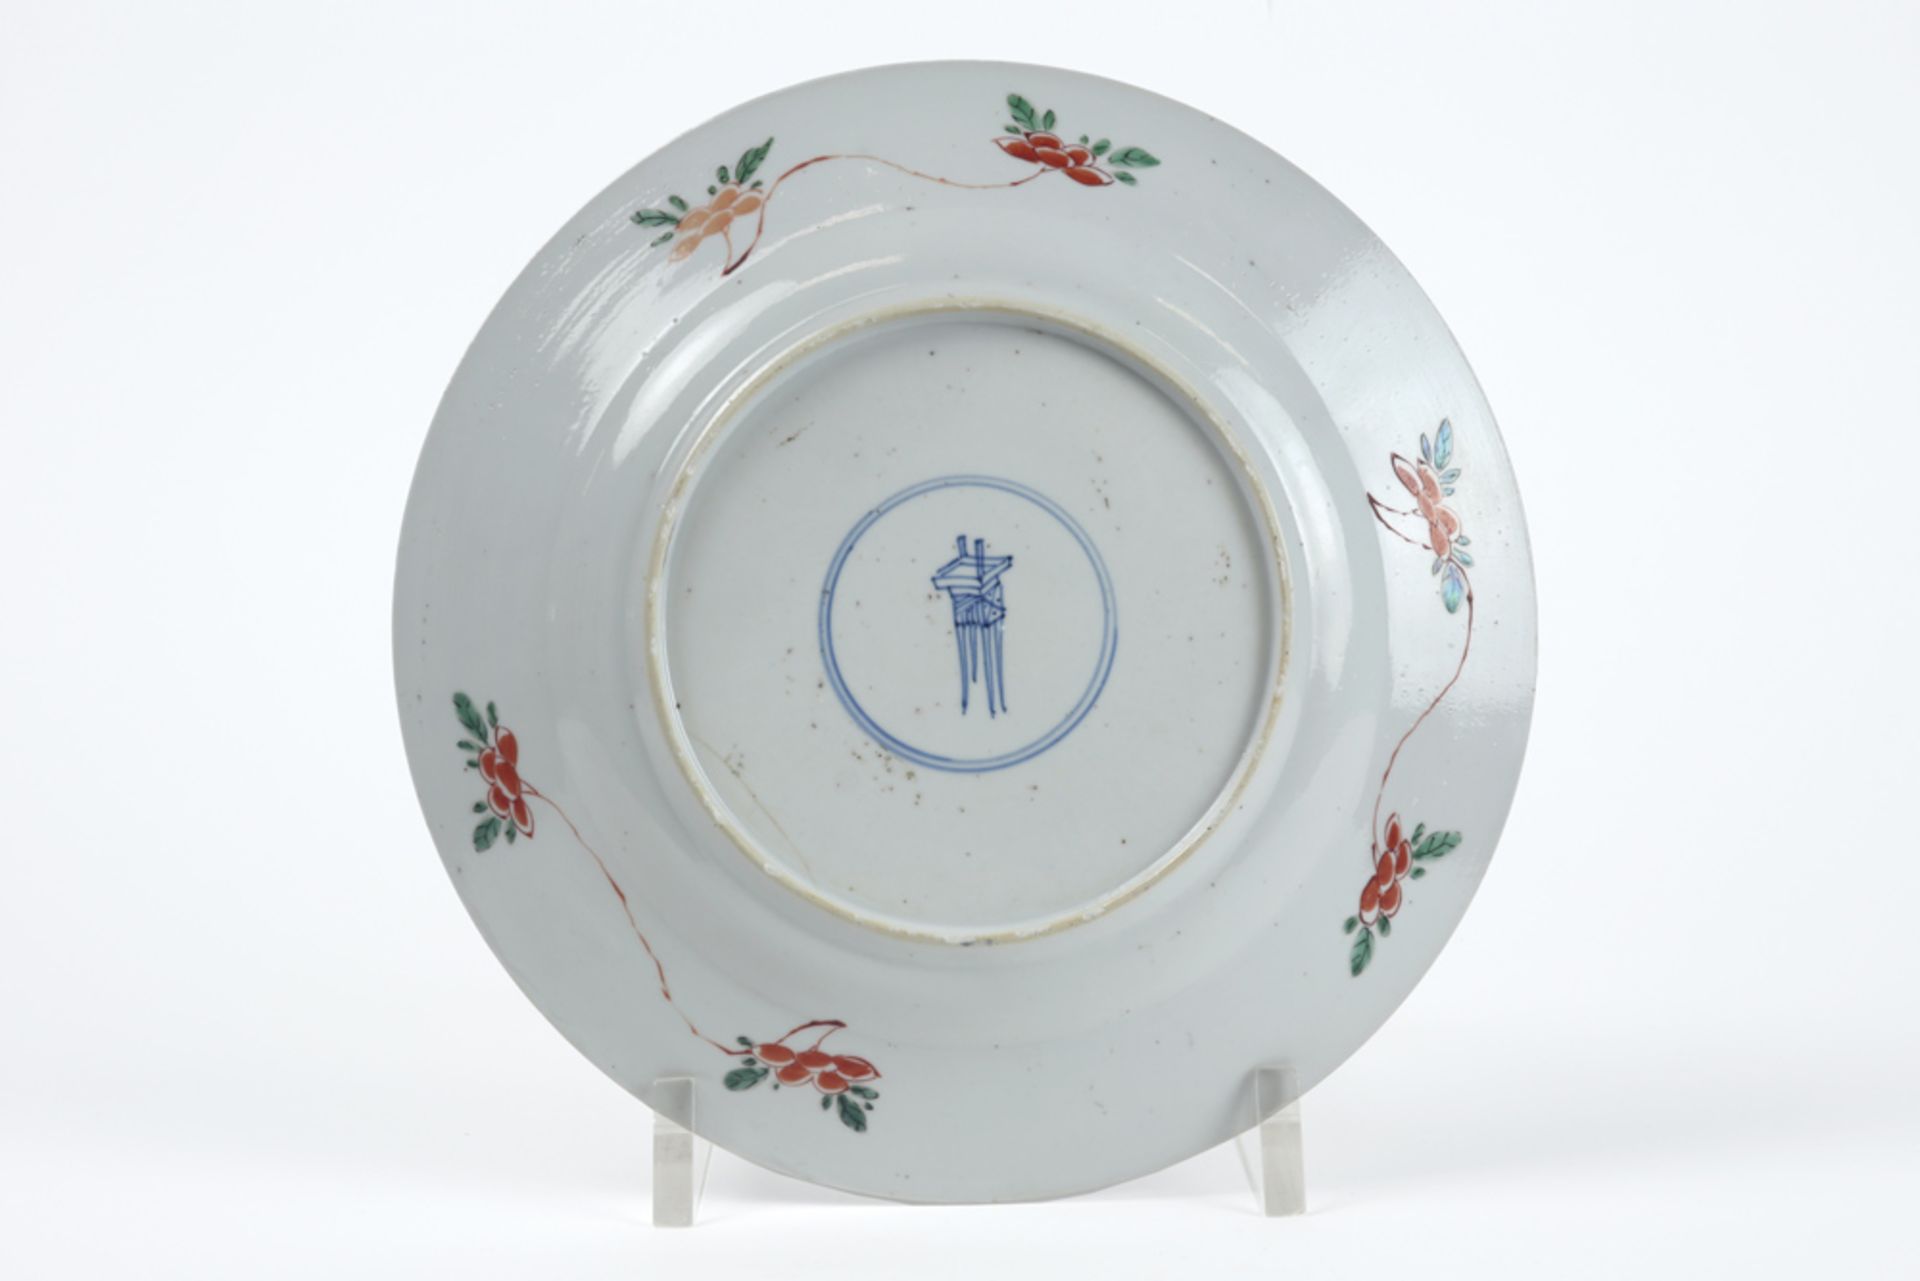 17th/18th Cent. Chinese Kang Xi period plate in marked in porcelain with a Famille Verte decor || - Image 2 of 2